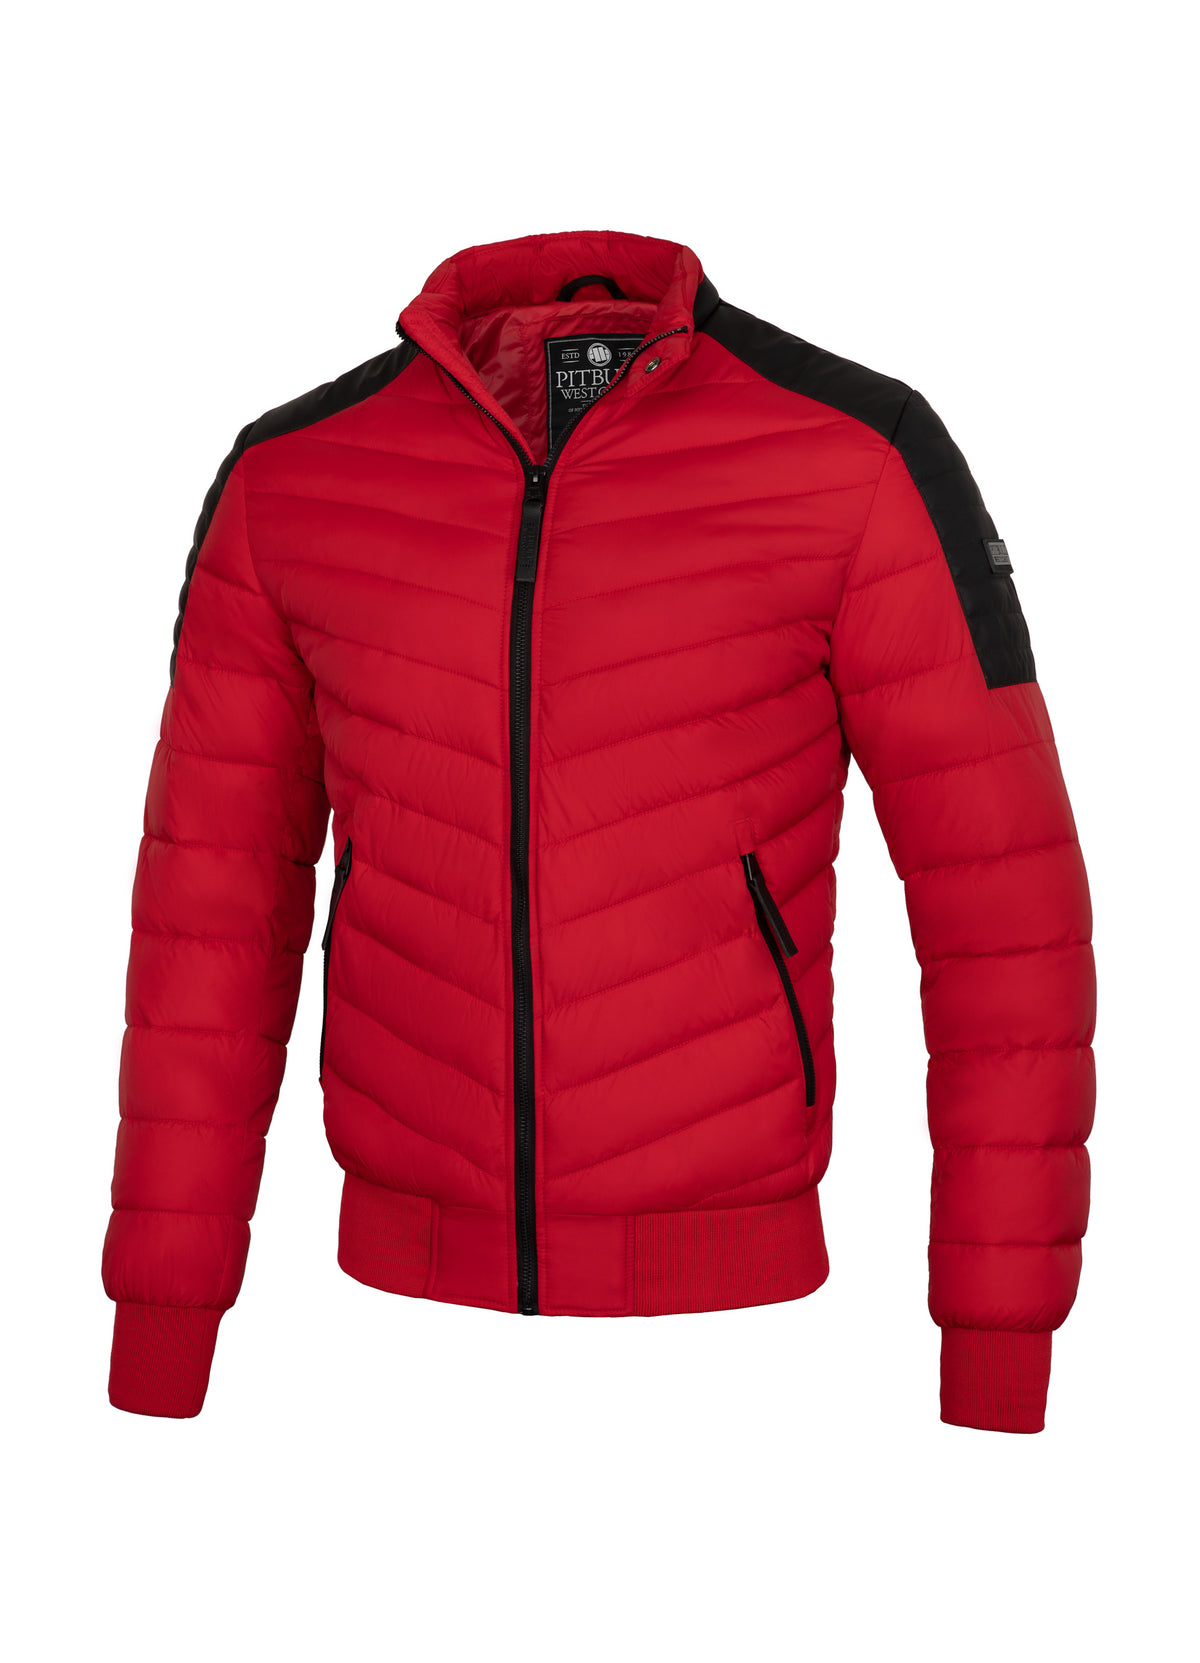 VICKERS Red/Black Quilted Jacket.